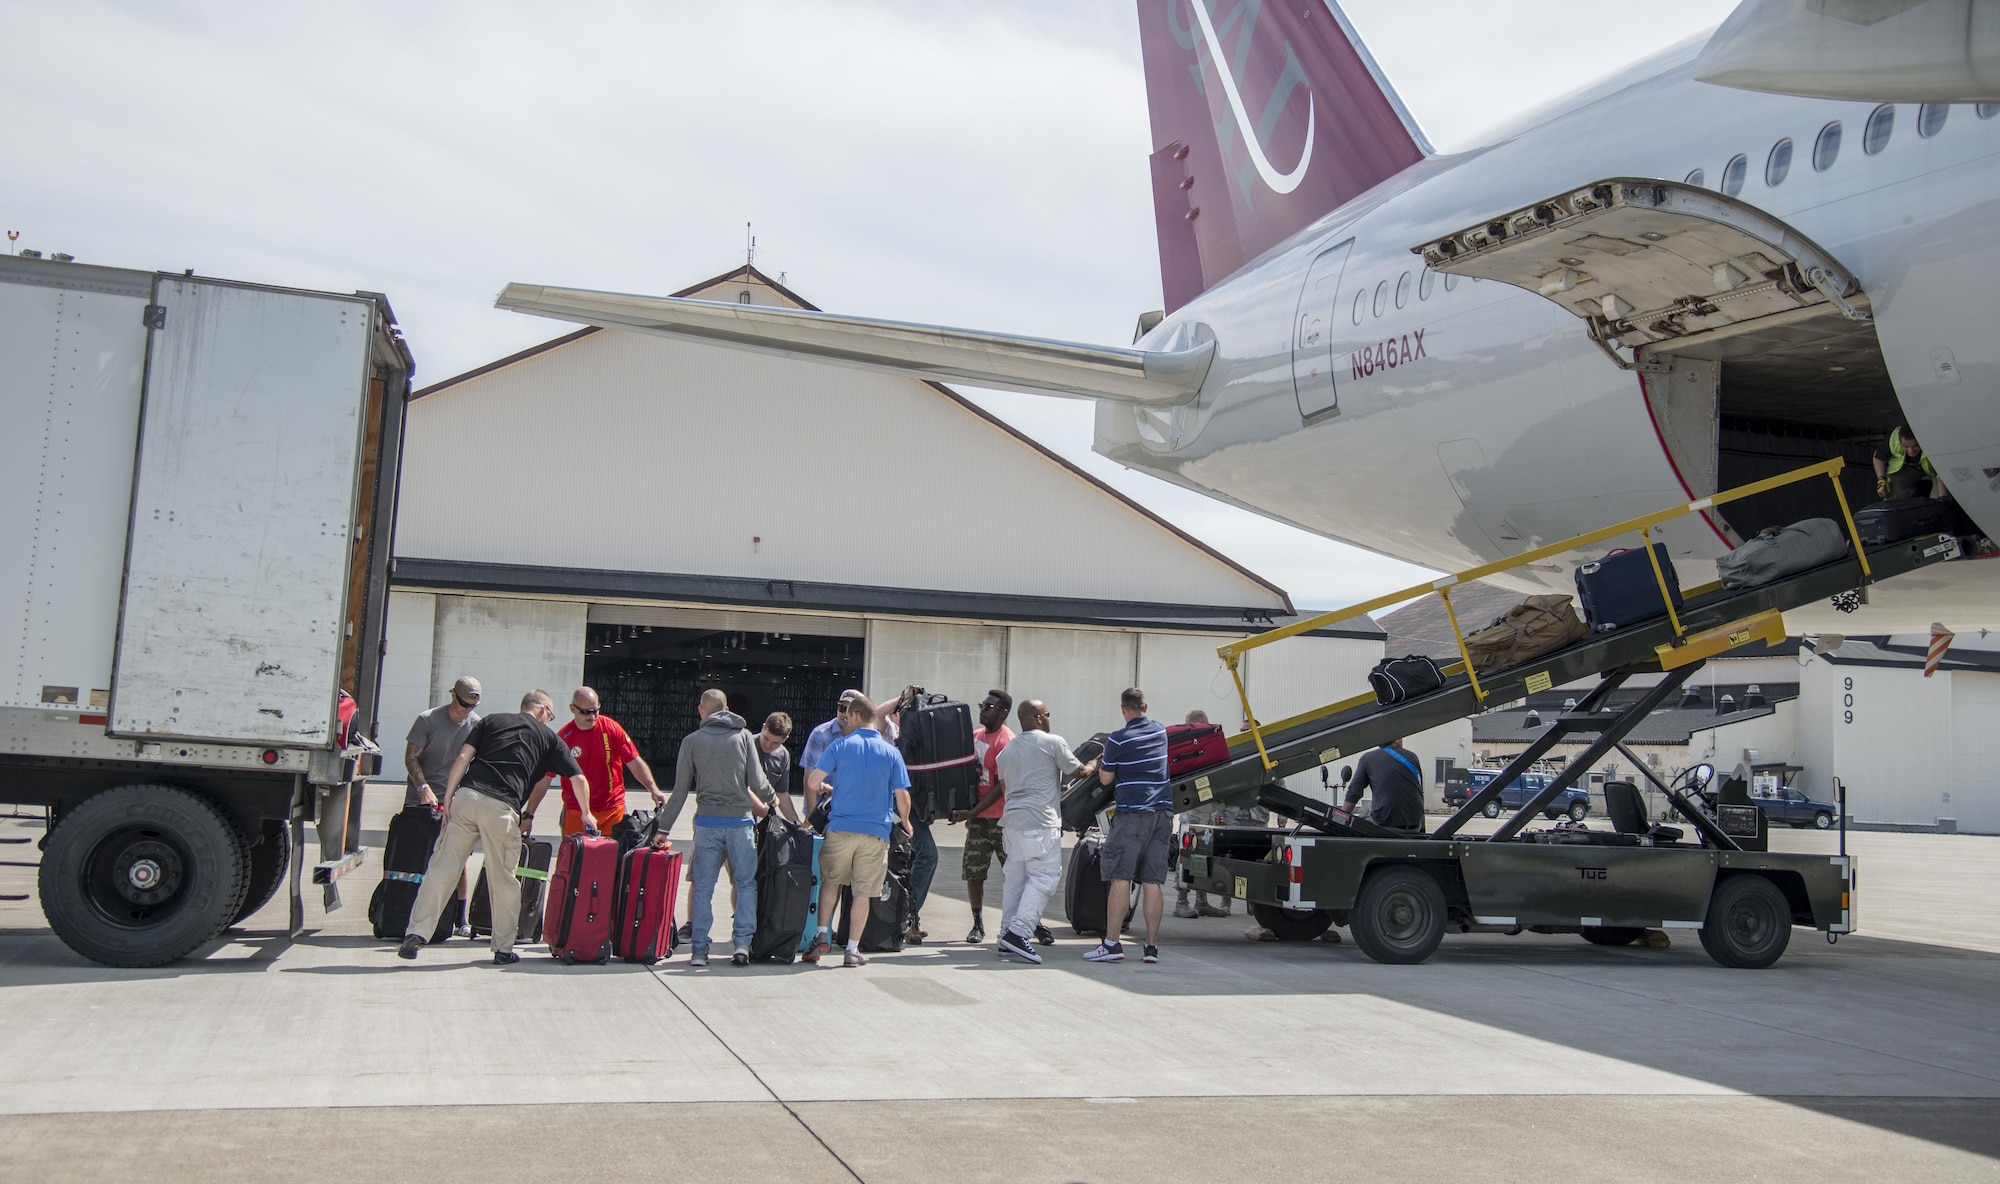 U.S. Air Force Airmen load luggage onto a Boeing 757 at Misawa Air Base, Japan, July 11, 2016. Airmen loaded cargo for the mass movement of approximately 250 Airmen from the 35th Fighter Wing to Pangkalan Udara Butterworth and Pangkalan Udara Subang, Malaysia, to take part in exercise Cope Taufan 16. This large force employment exercise will include operations in air superiority, airborne command and control, close air support, interdiction, air refueling, tactical airlift and tactical air drop. (U.S. Air Force photo by Senior Airman Brittany A. Chase)